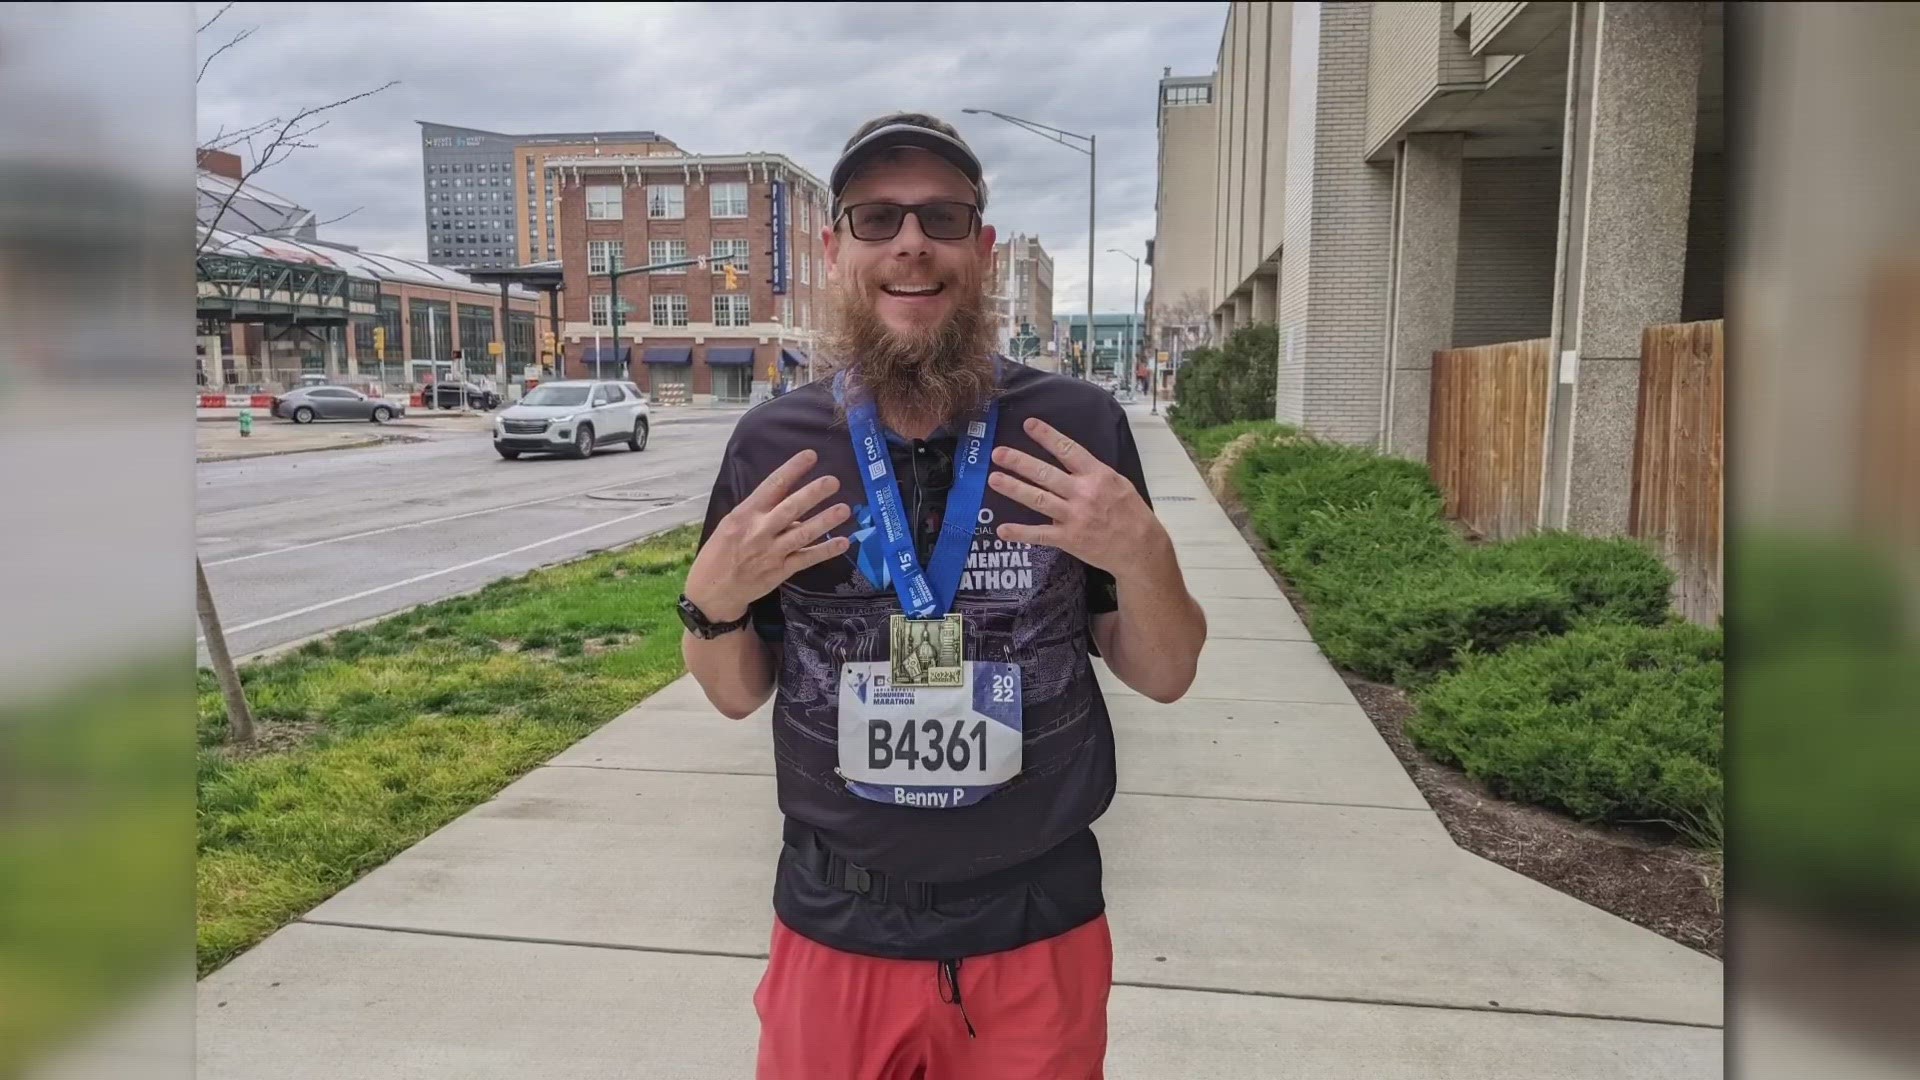 Ben Pushka ran in his hometown marathon on Sunday morning, the Glass City Marathon. It was the final race on his year-long journey.